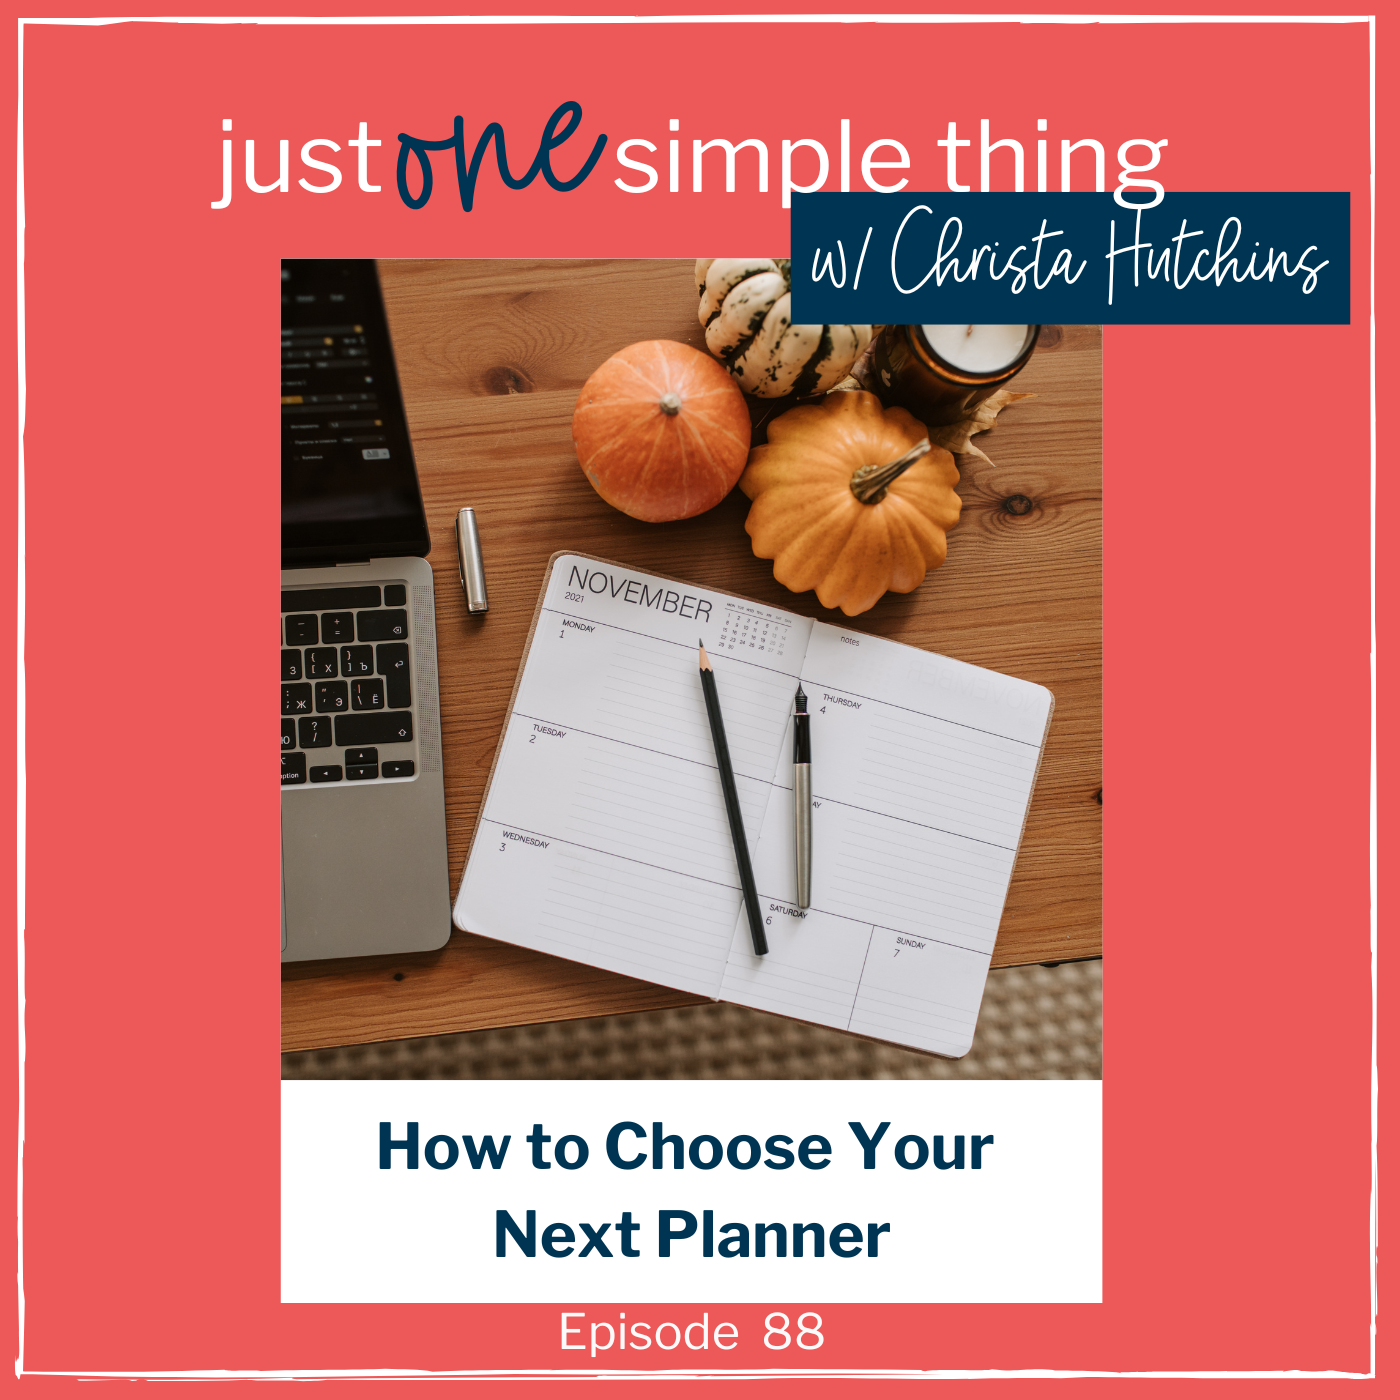 How to Choose a Planner